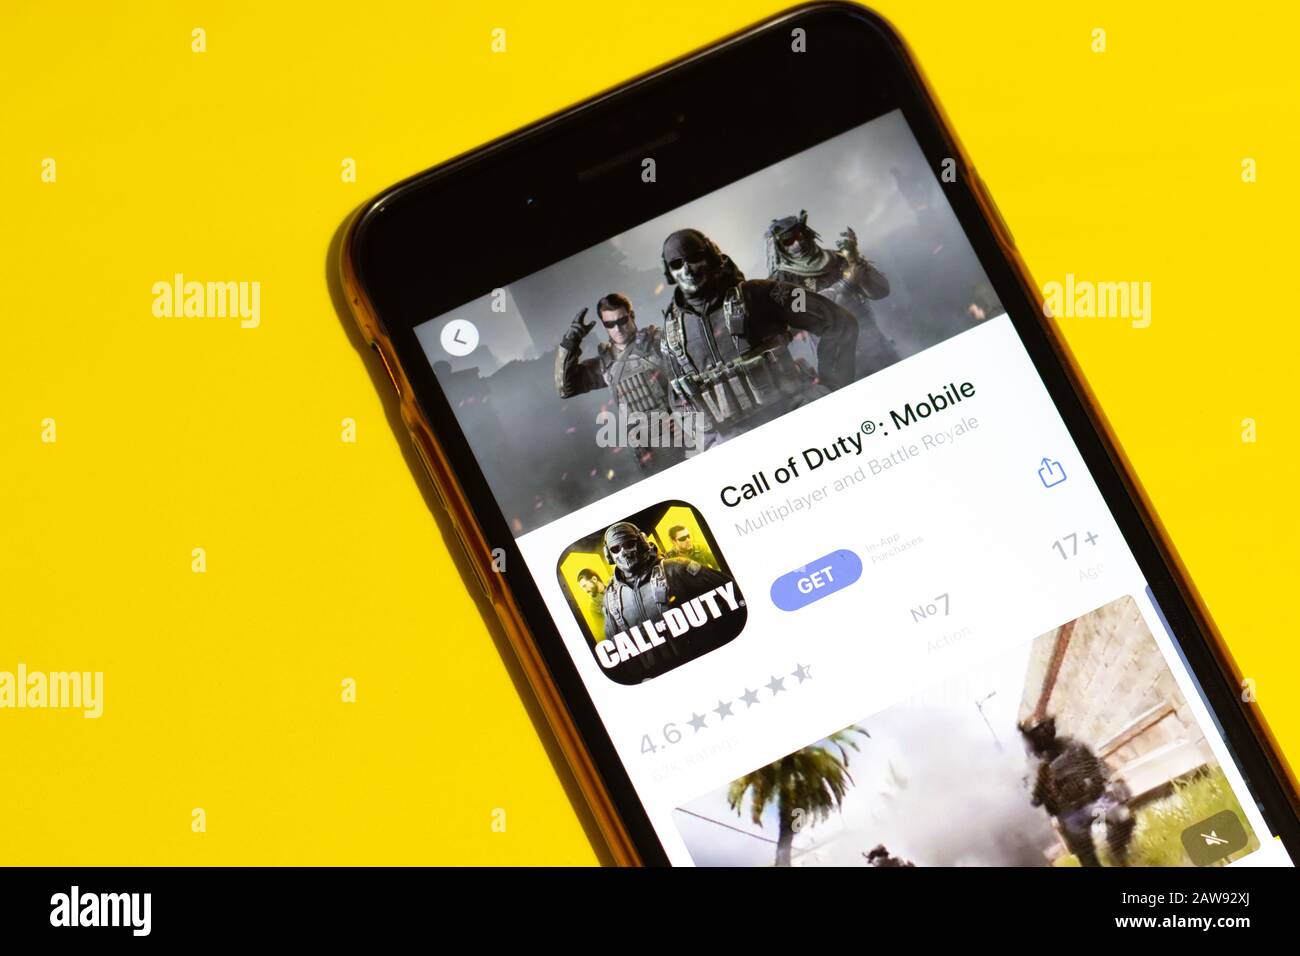 Los Angeles, California, USA - 25 January 2020: Logo of Call of Duty game mobile app on phone screen close up top view on yellow background Stock Photo